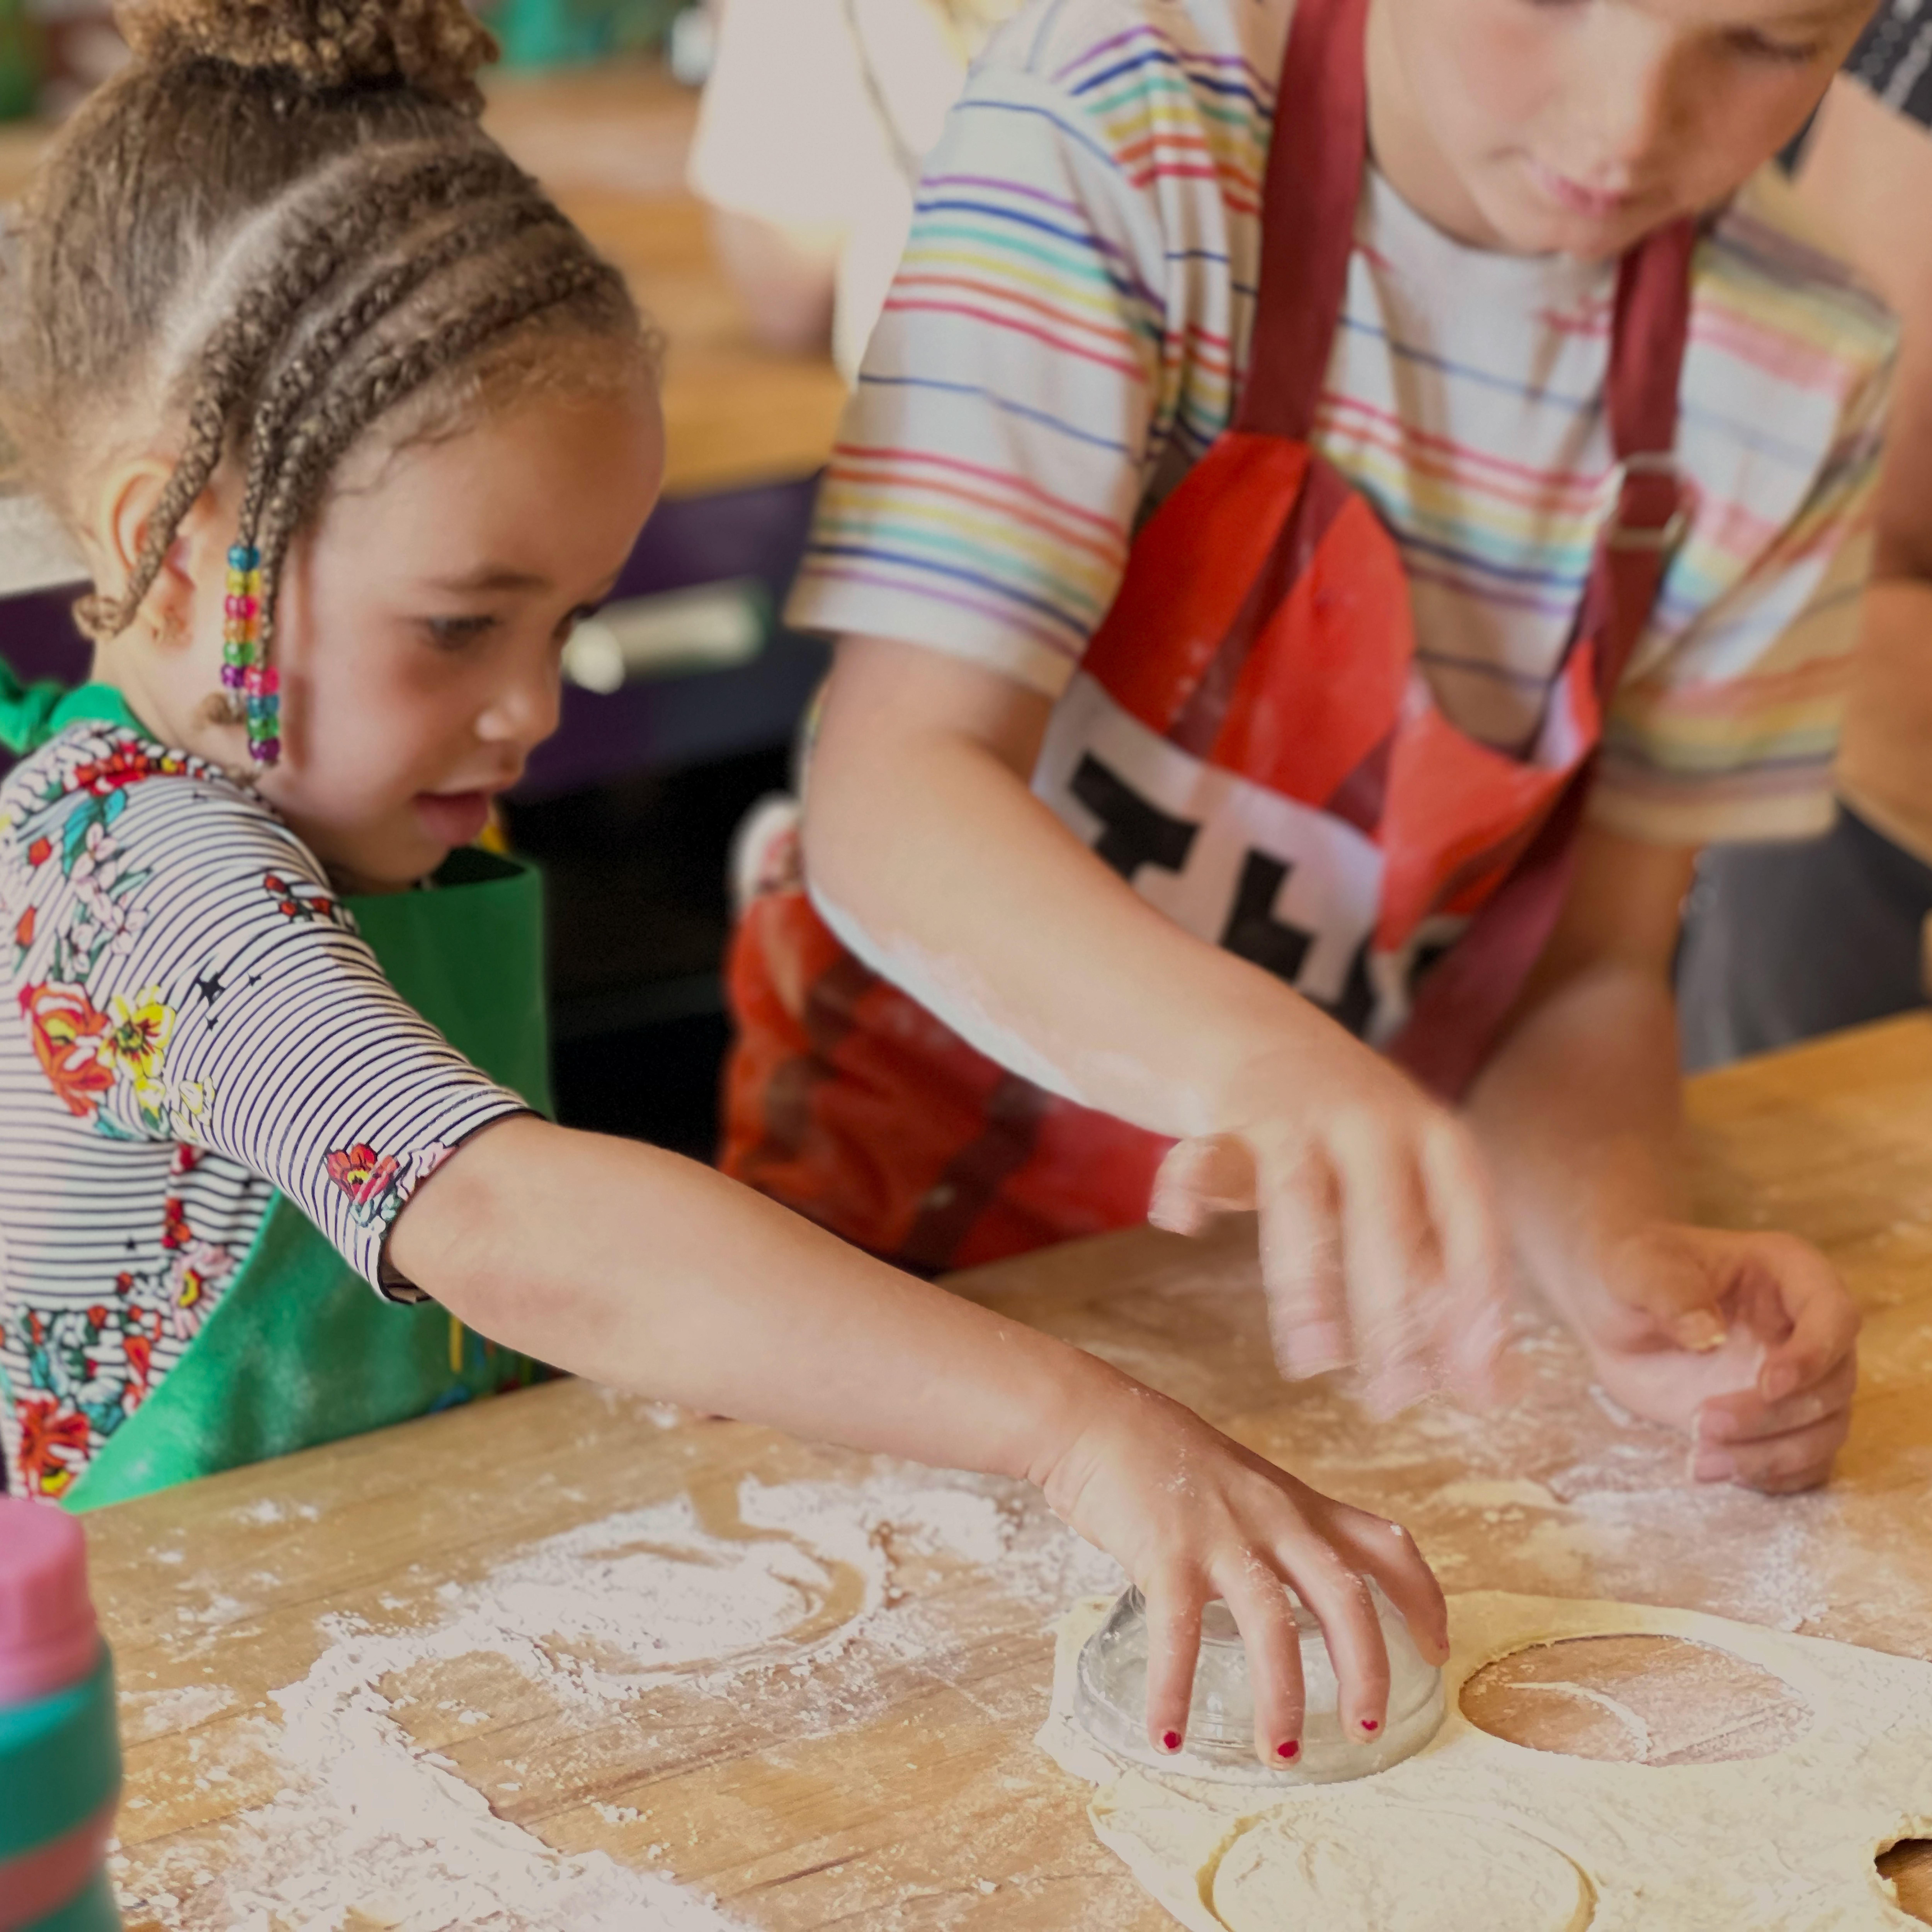 Two children wearing aprons, focused on cutting dough with a round cutter on a flour-dusted table.